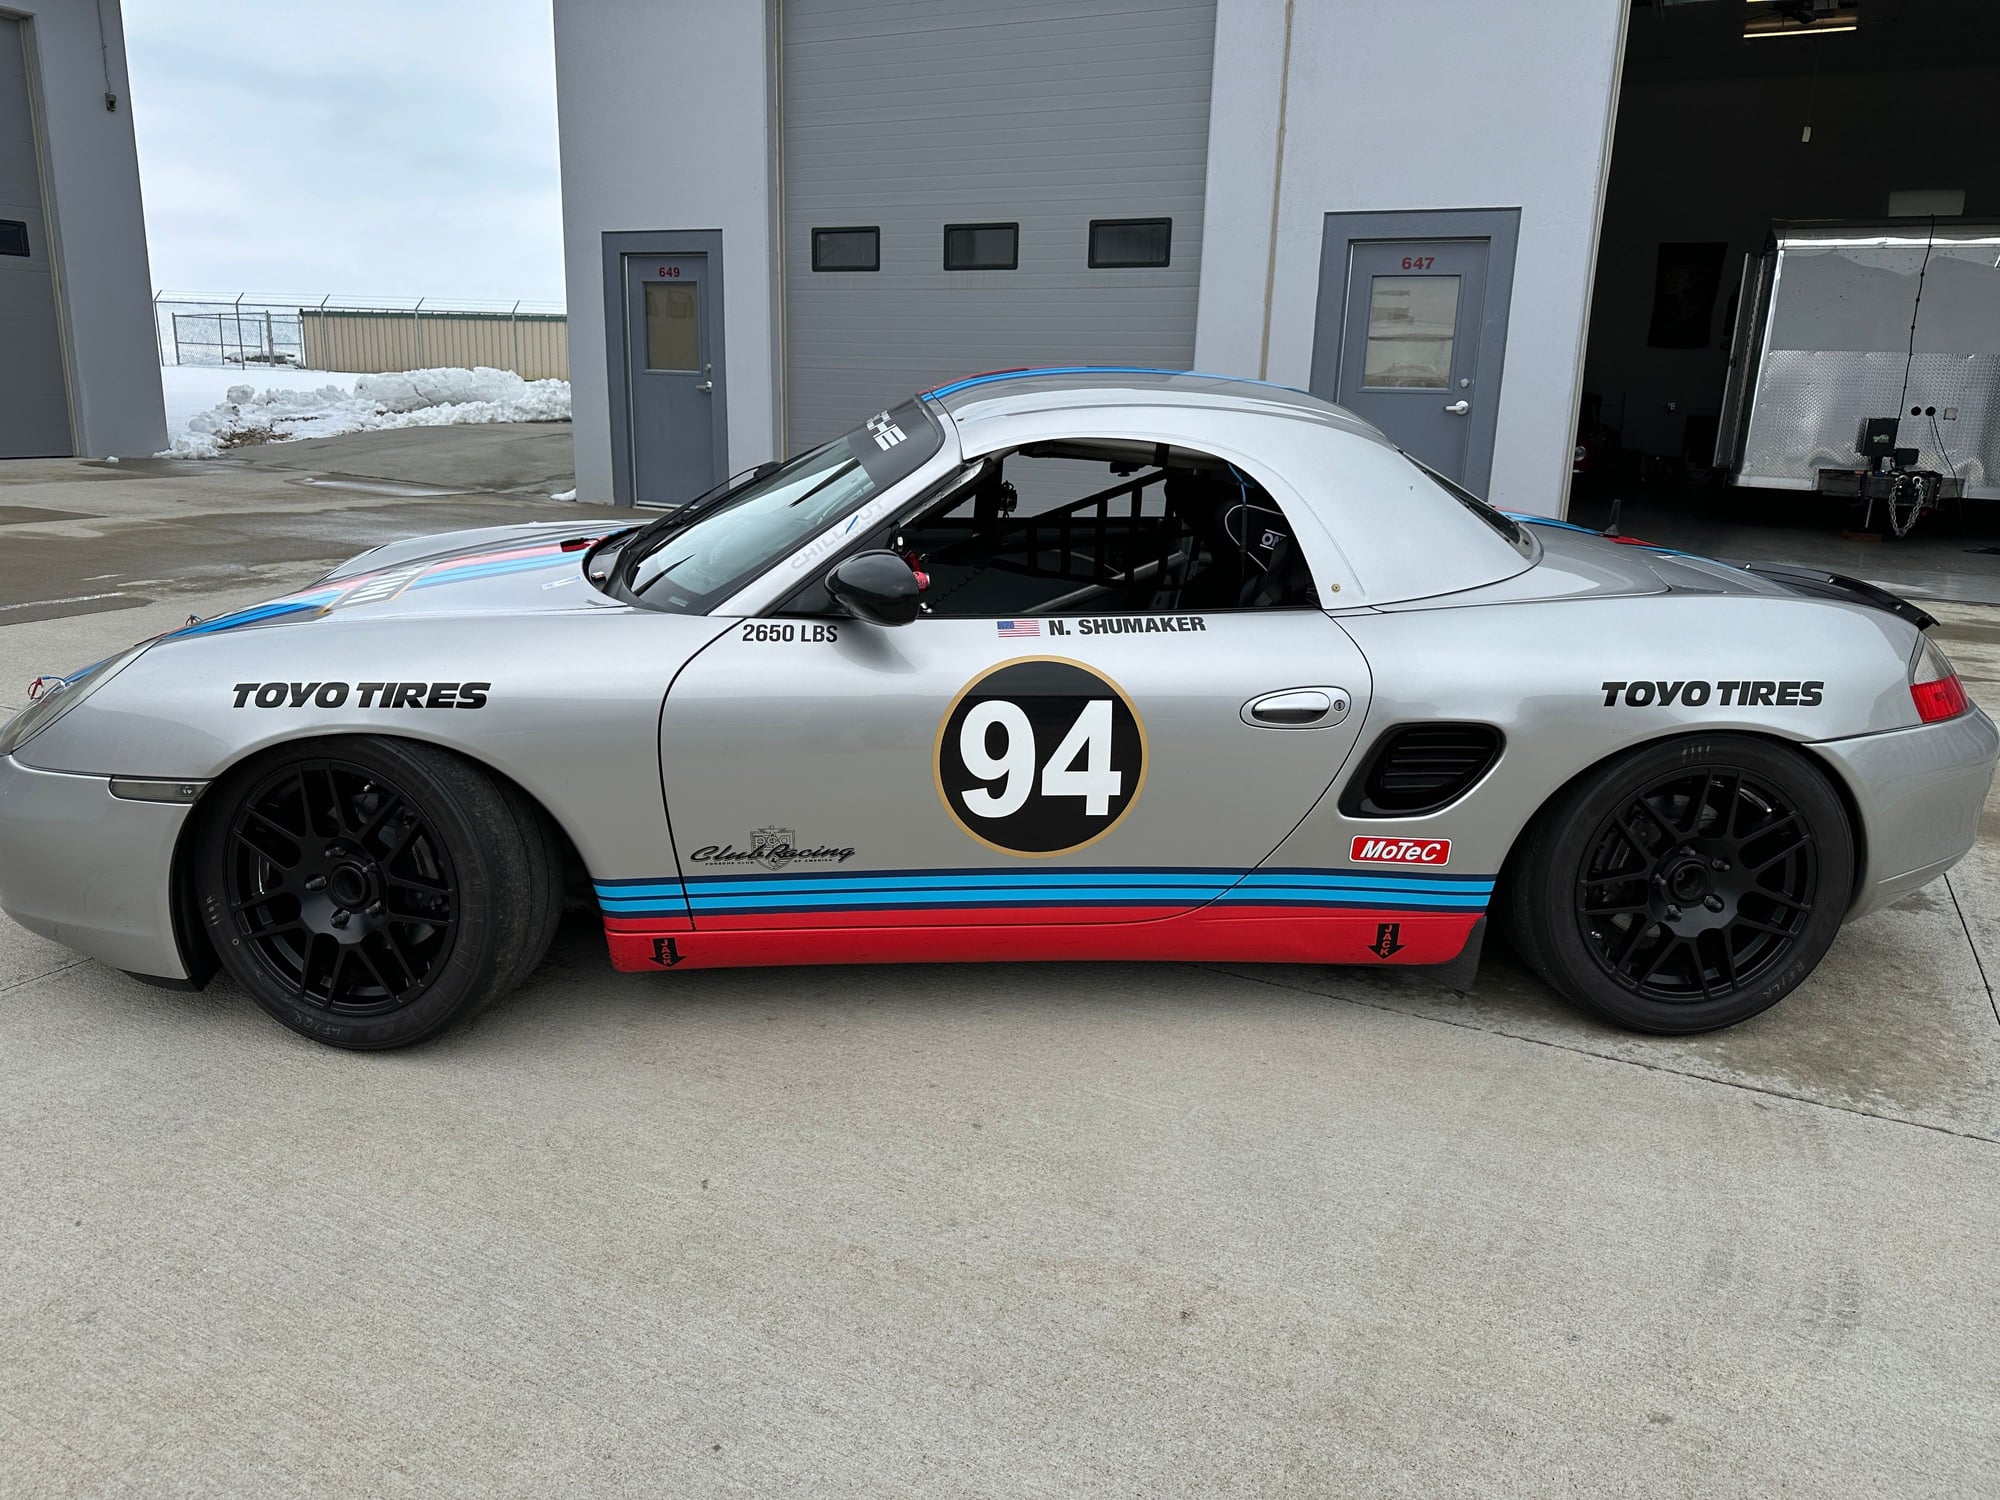 1997 Porsche Boxster - FS: Spec Boxster Race Car - 1997 Chassis - High End Build - Fast Car - Ready to Race! - Used - VIN WP0CA2983VS623106 - 6 cyl - 2WD - Manual - Convertible - Silver - Fort Collins, CO 80525, United States